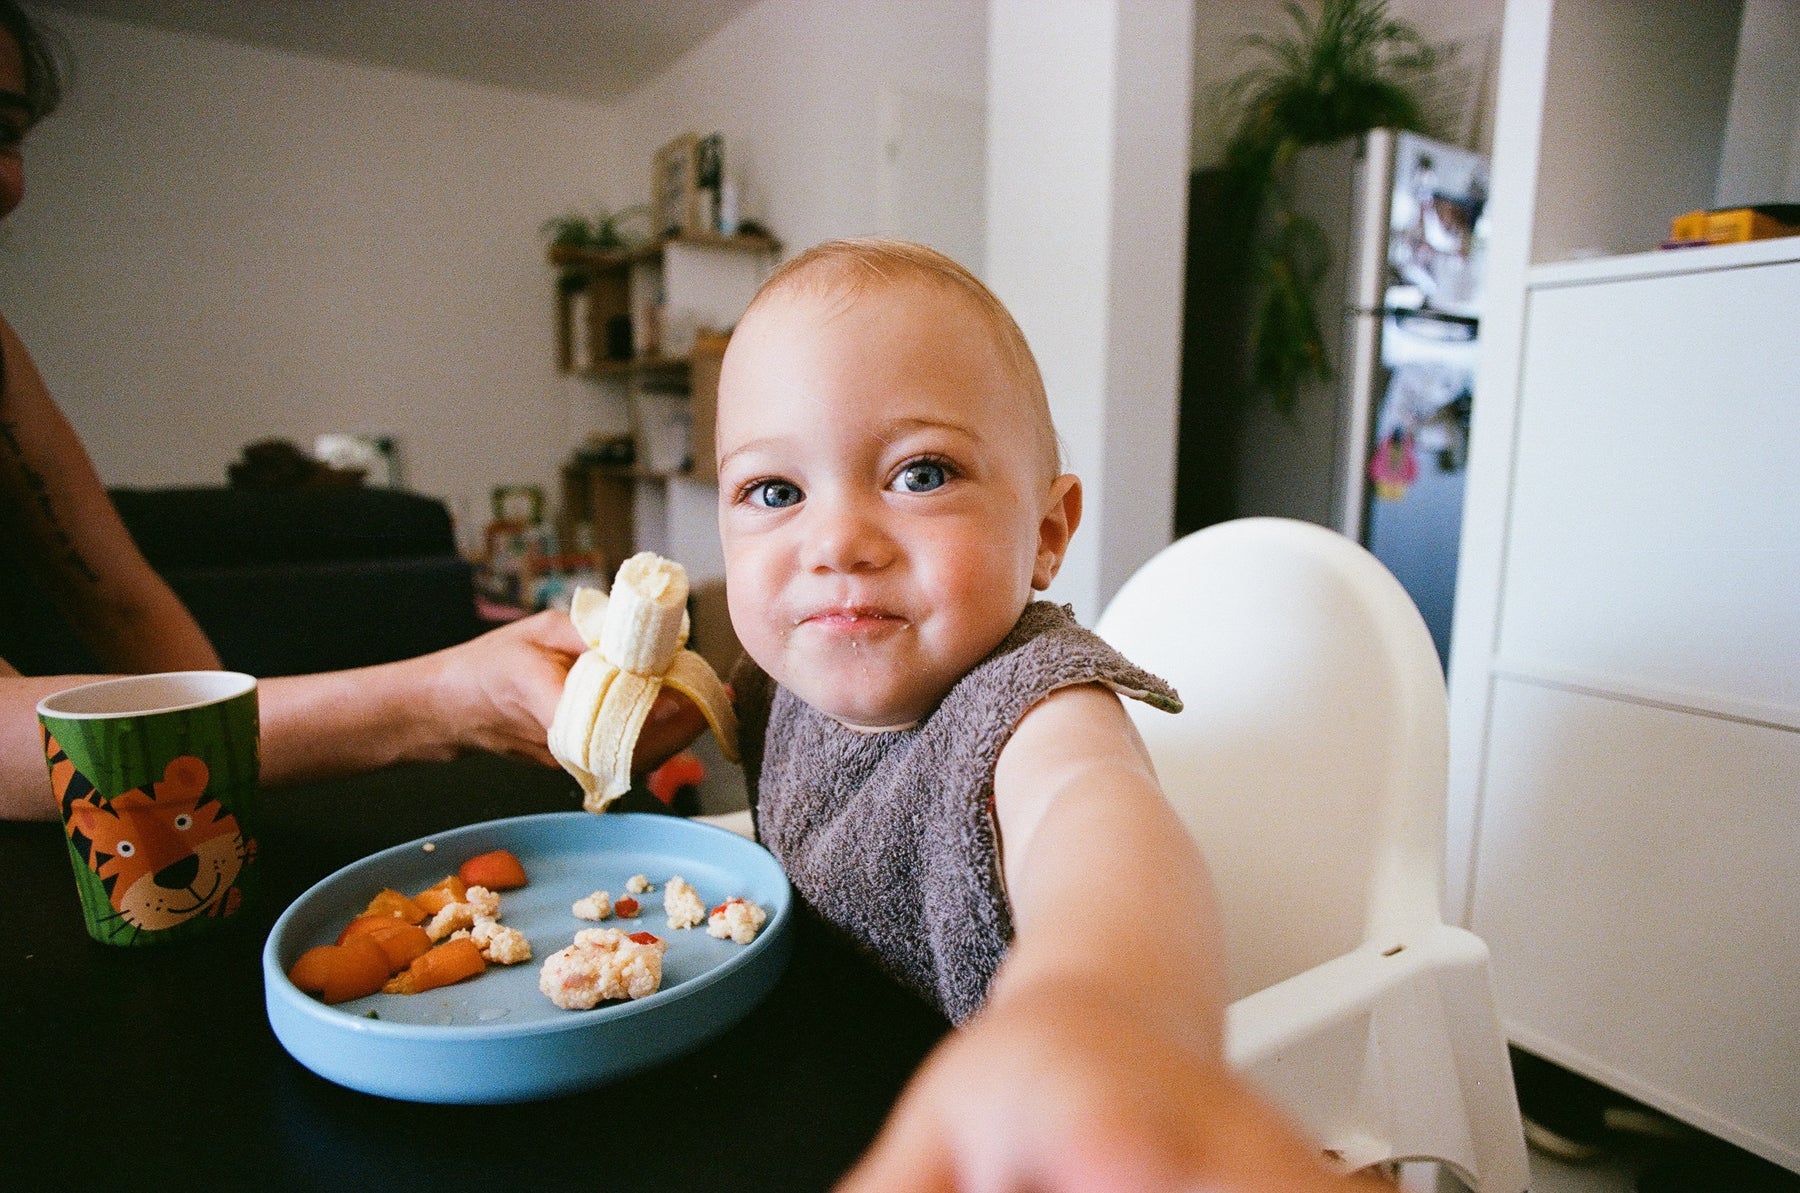  A mother feeding a baby in a highchair a banana as part of baby-led weaning.